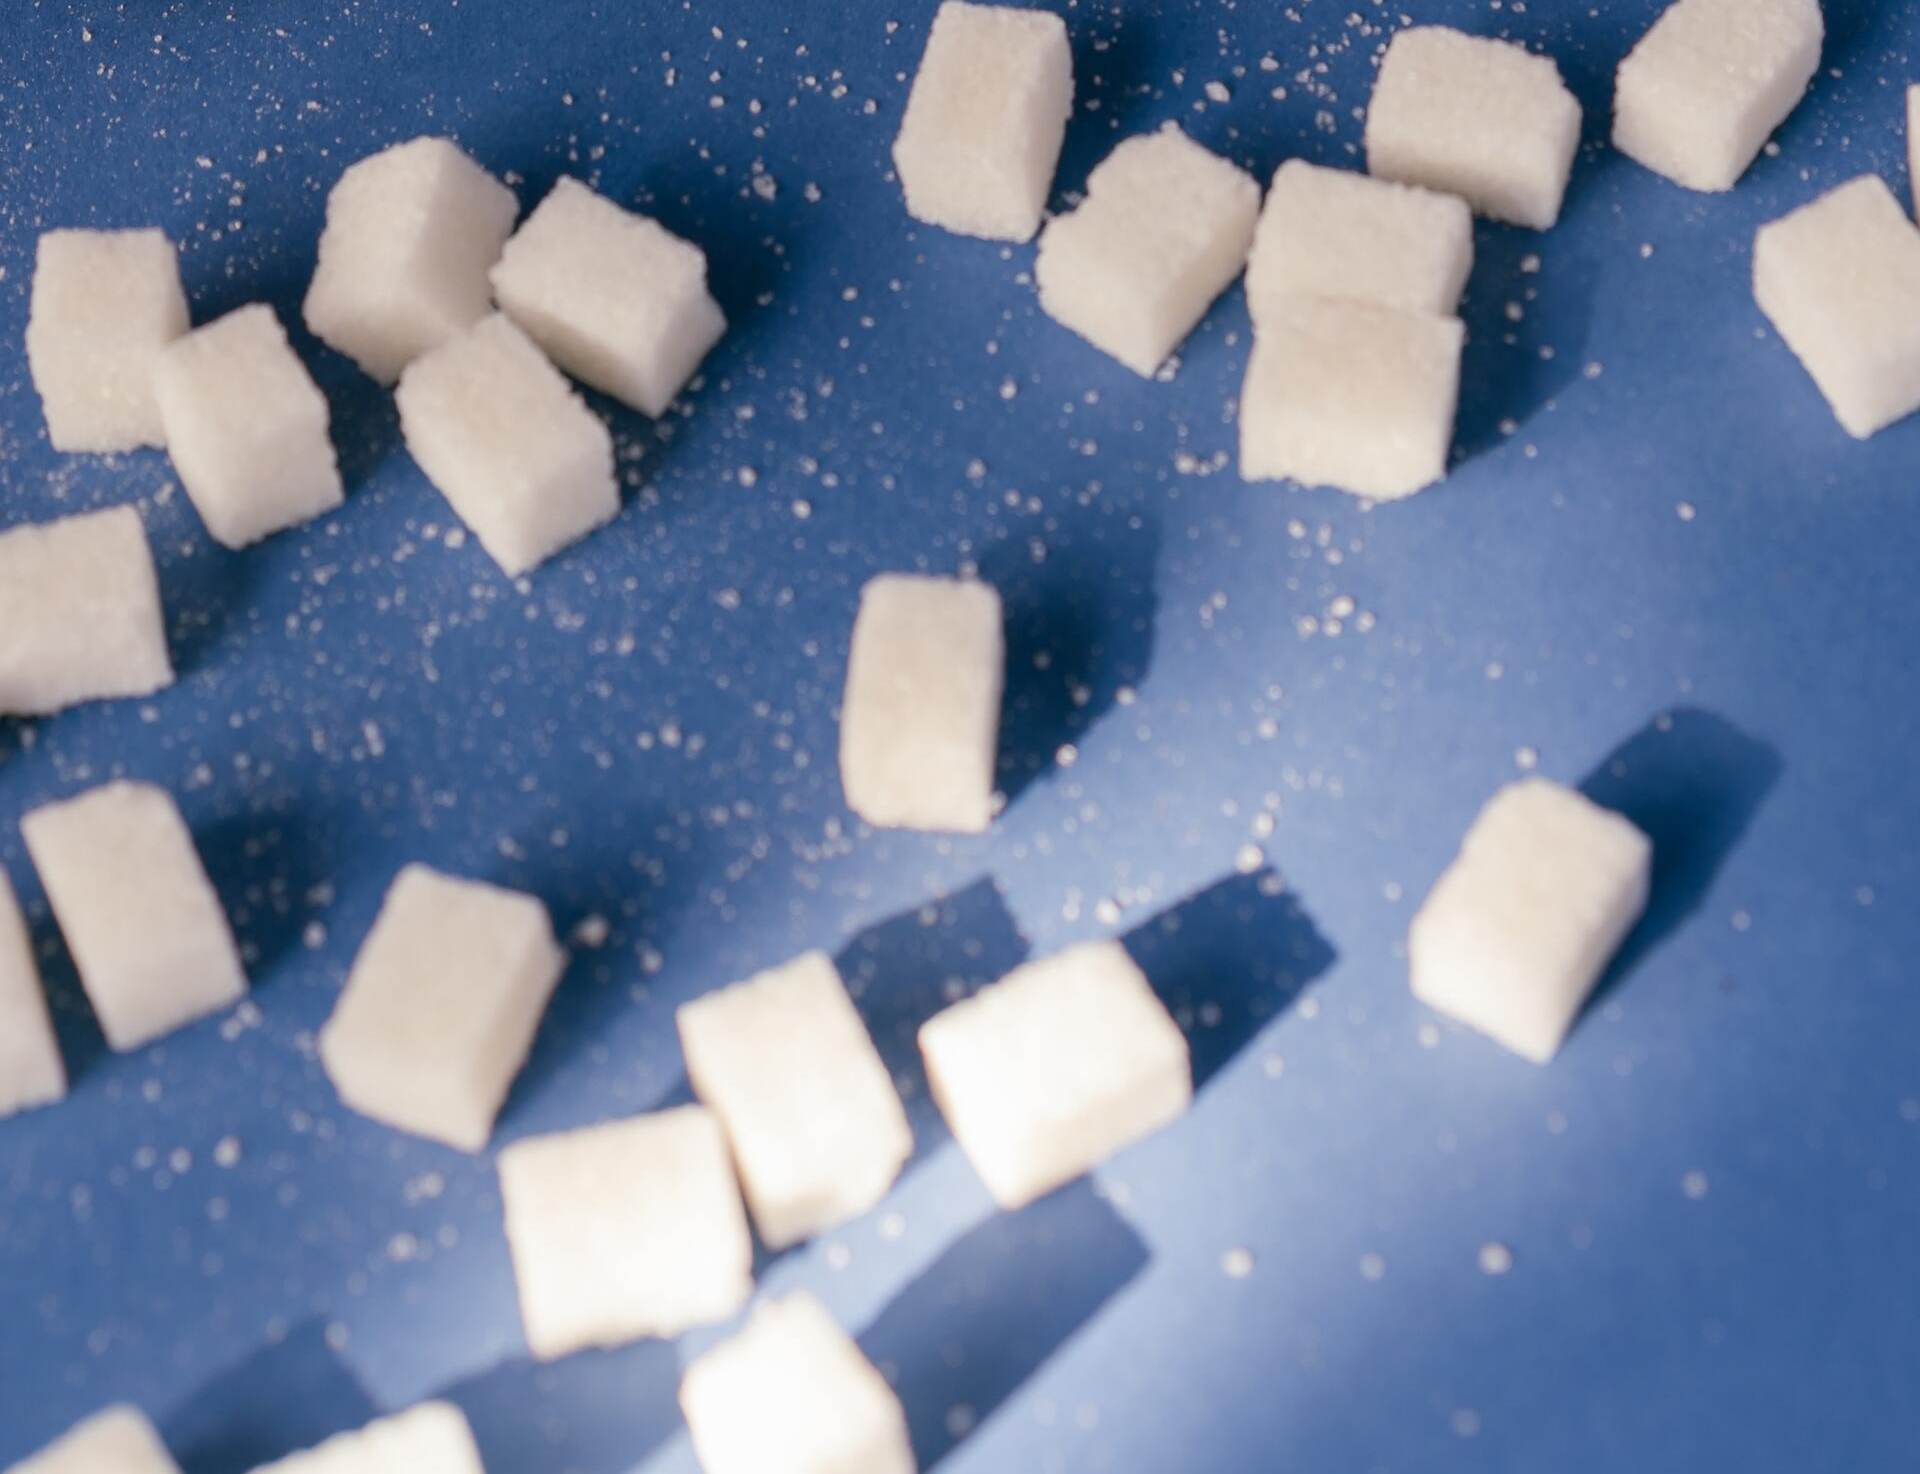 How Does Sugar Lead to Tooth Decay?